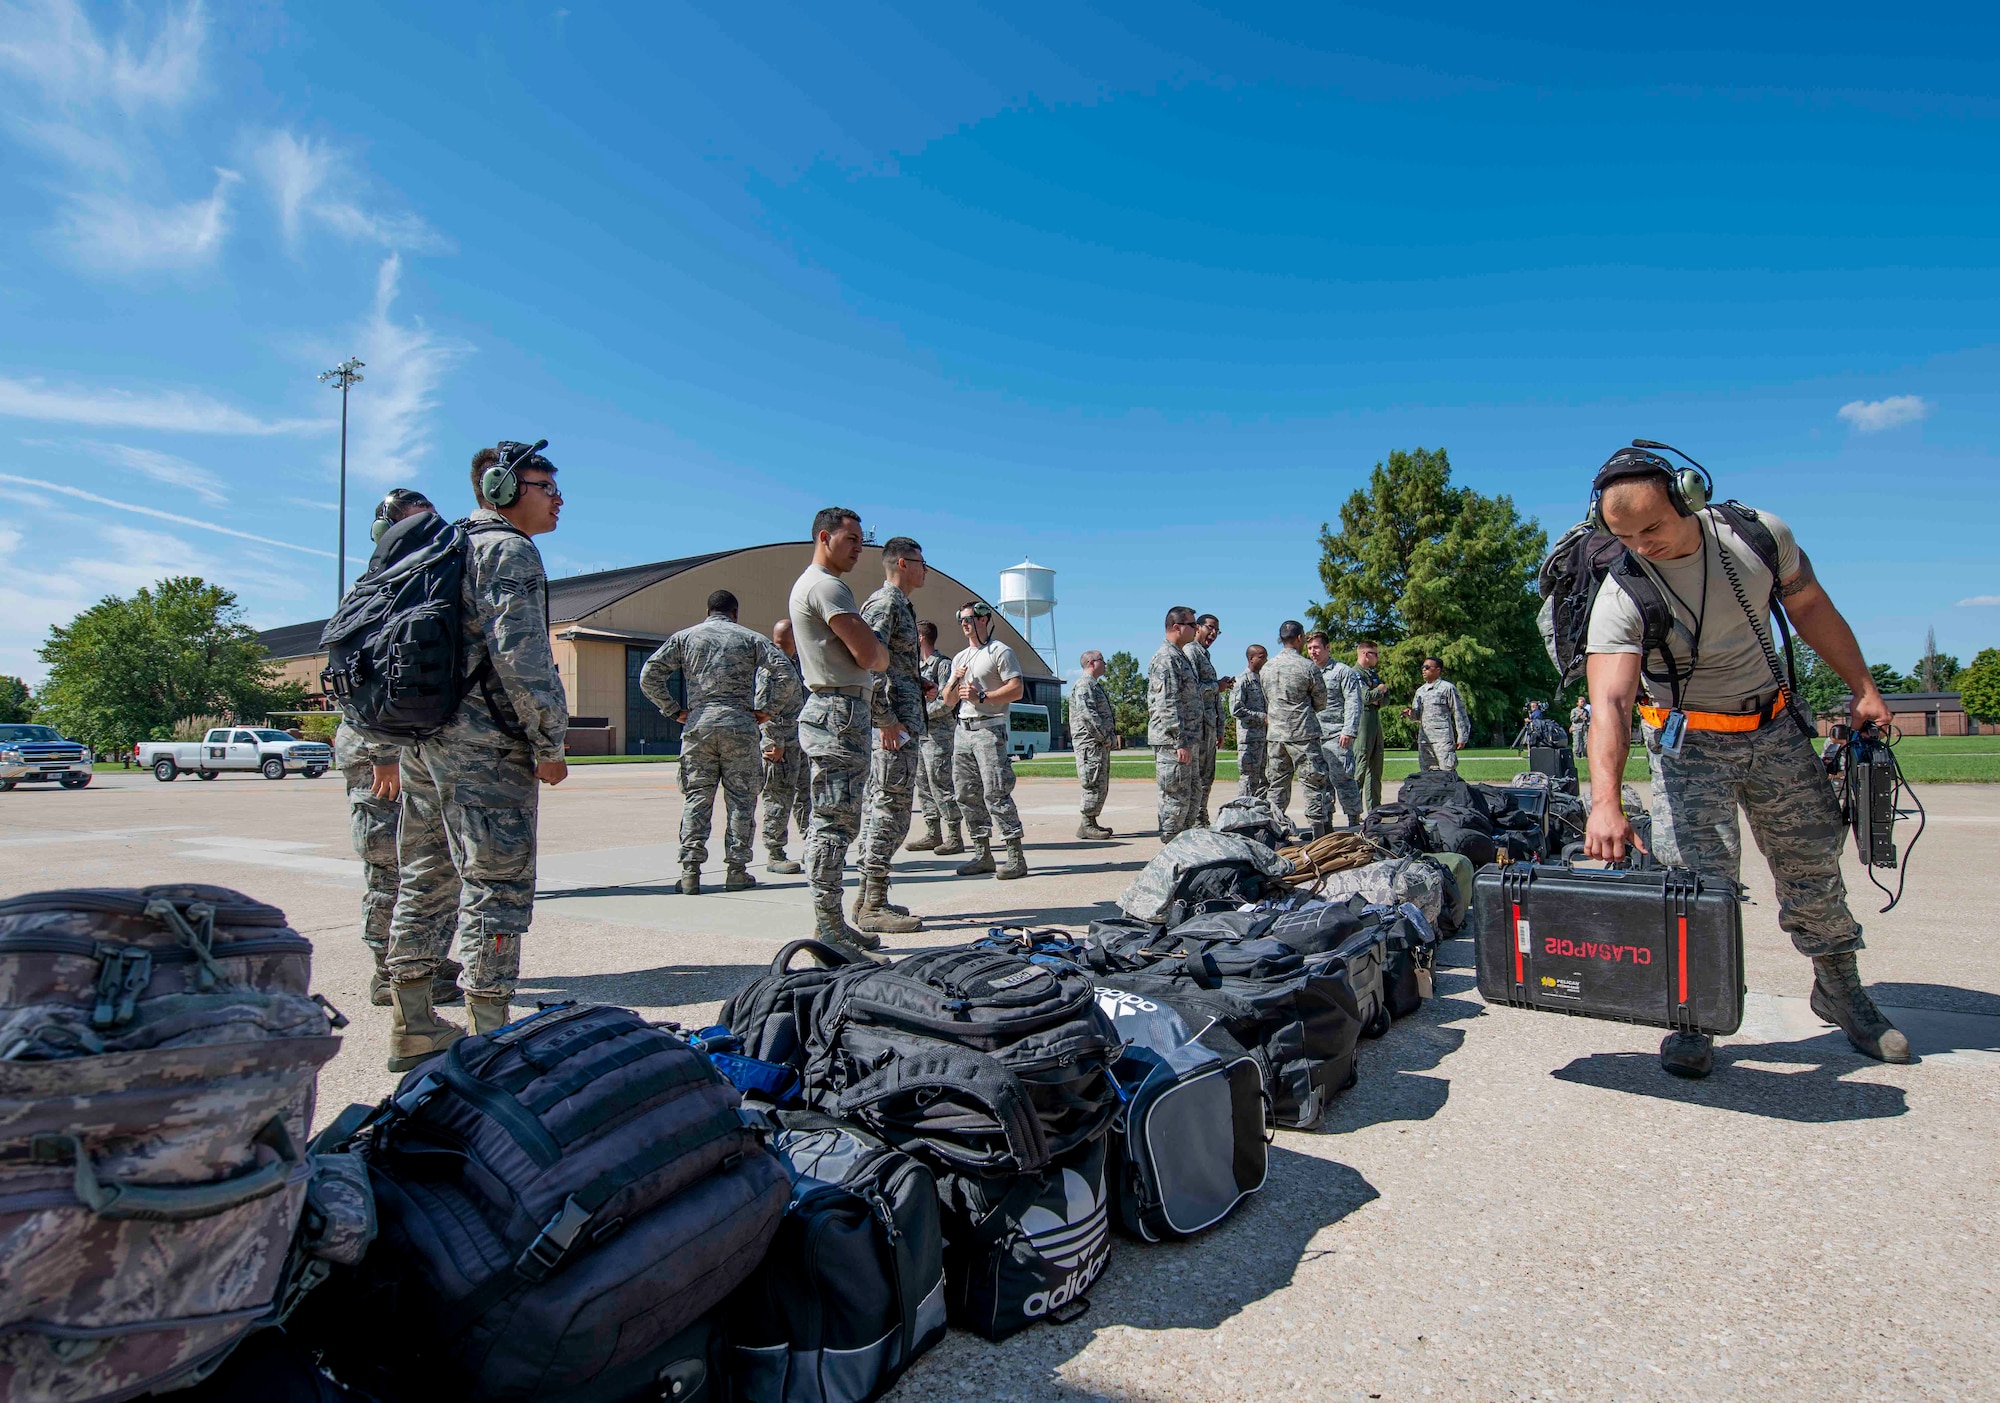 Airmen with Joint Base Charleston unload their gear off a C-17 Globemaster III assigned to the 437th Airlift Wing during Hurricane Florence evacuation efforts, Sept. 11, 2018, at Scott AFB, Illinois. The purpose of the evacuation is to protect people and assets from the storm. (U.S. Air Force photo by Airman 1st Class Tara Stetler)